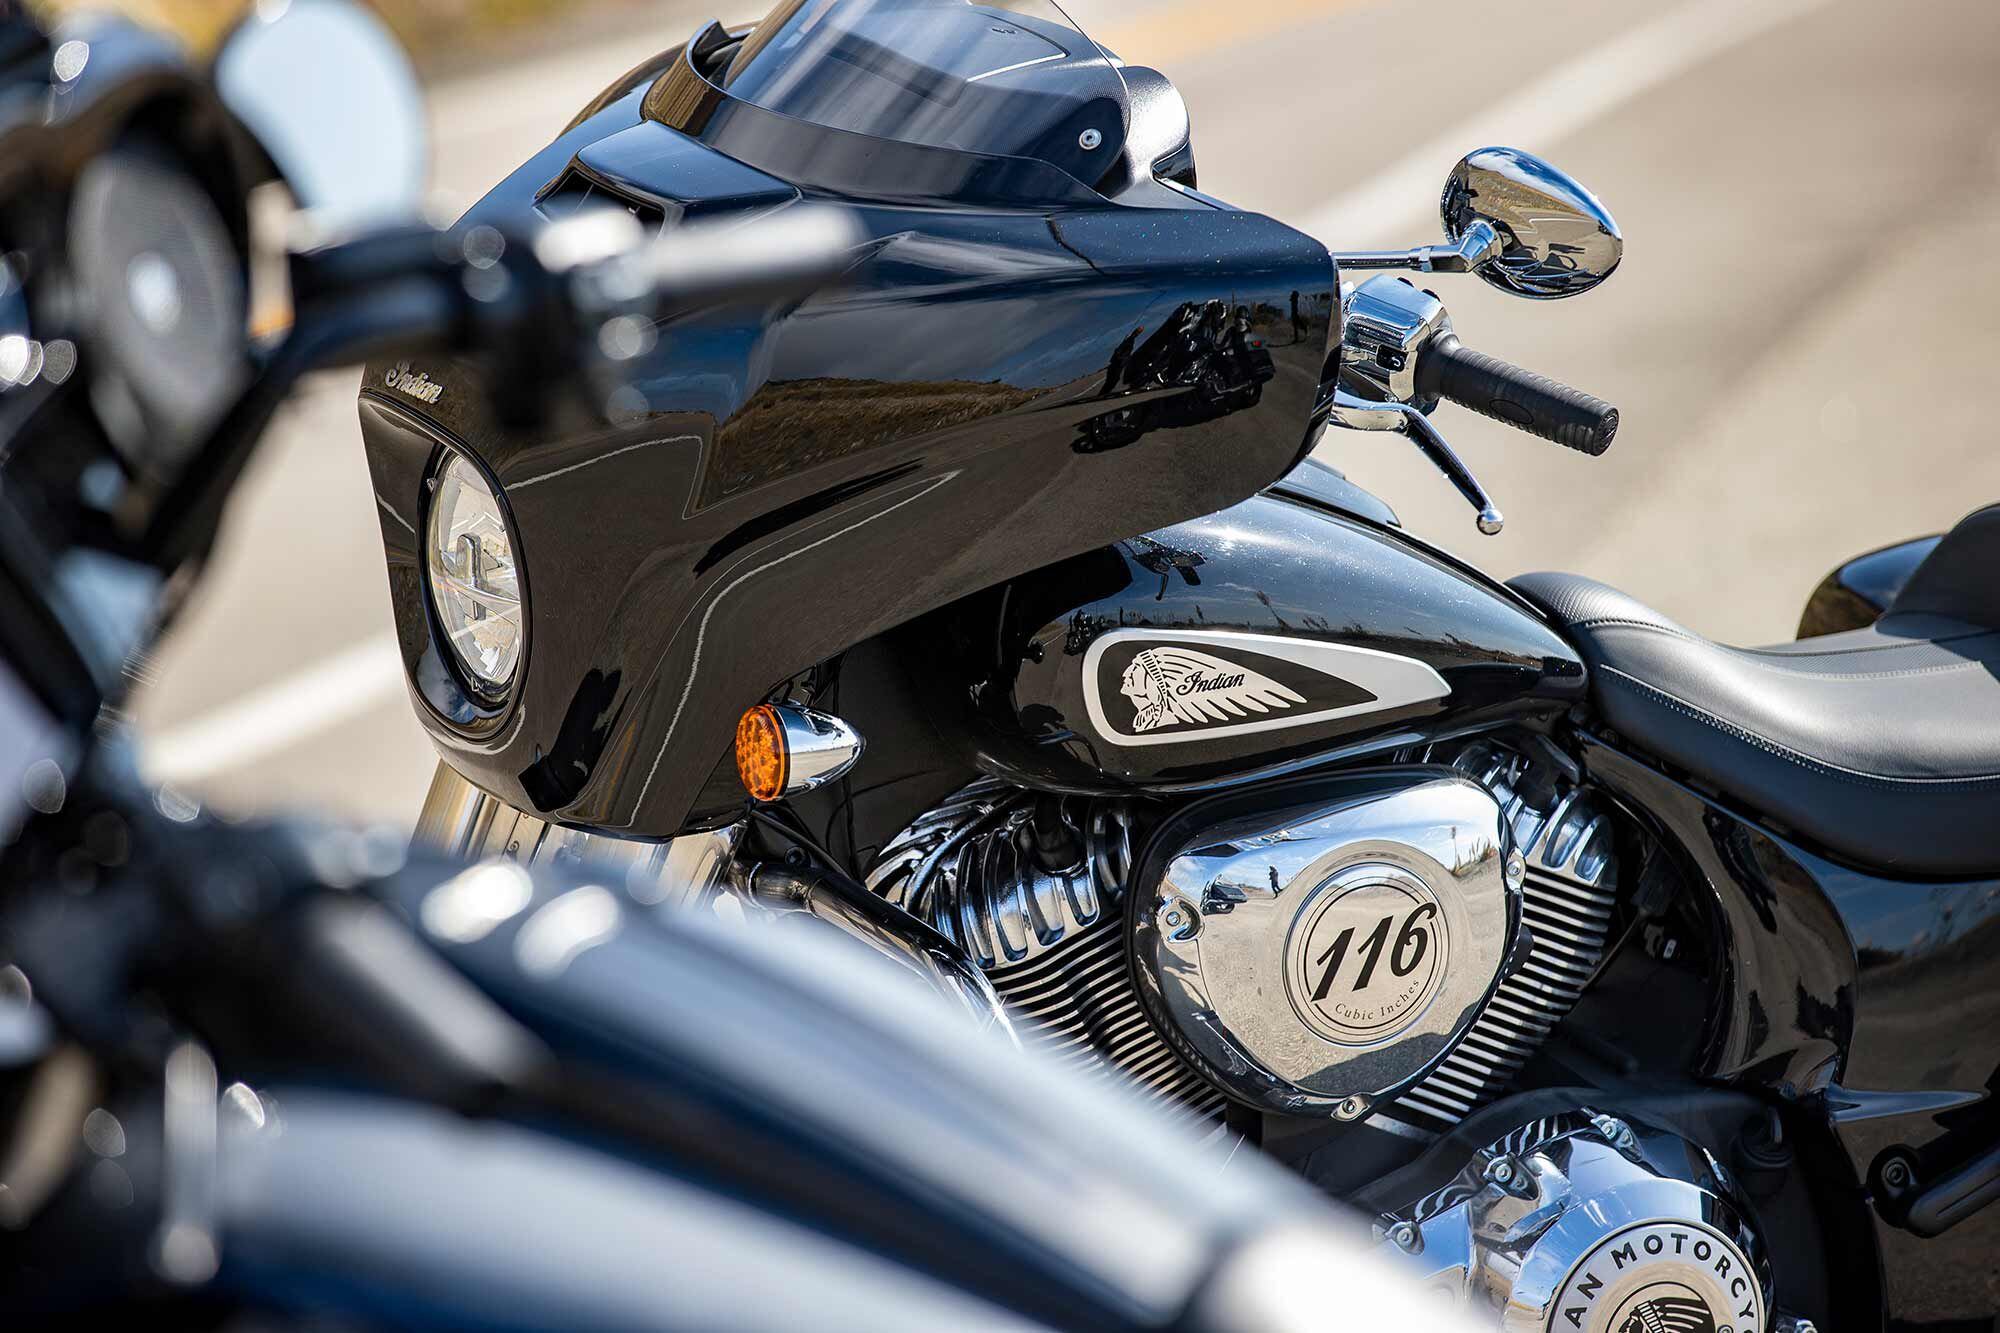 The only electronically adjustable windshield of the bunch gave Indian’s Chieftain the best wind management.